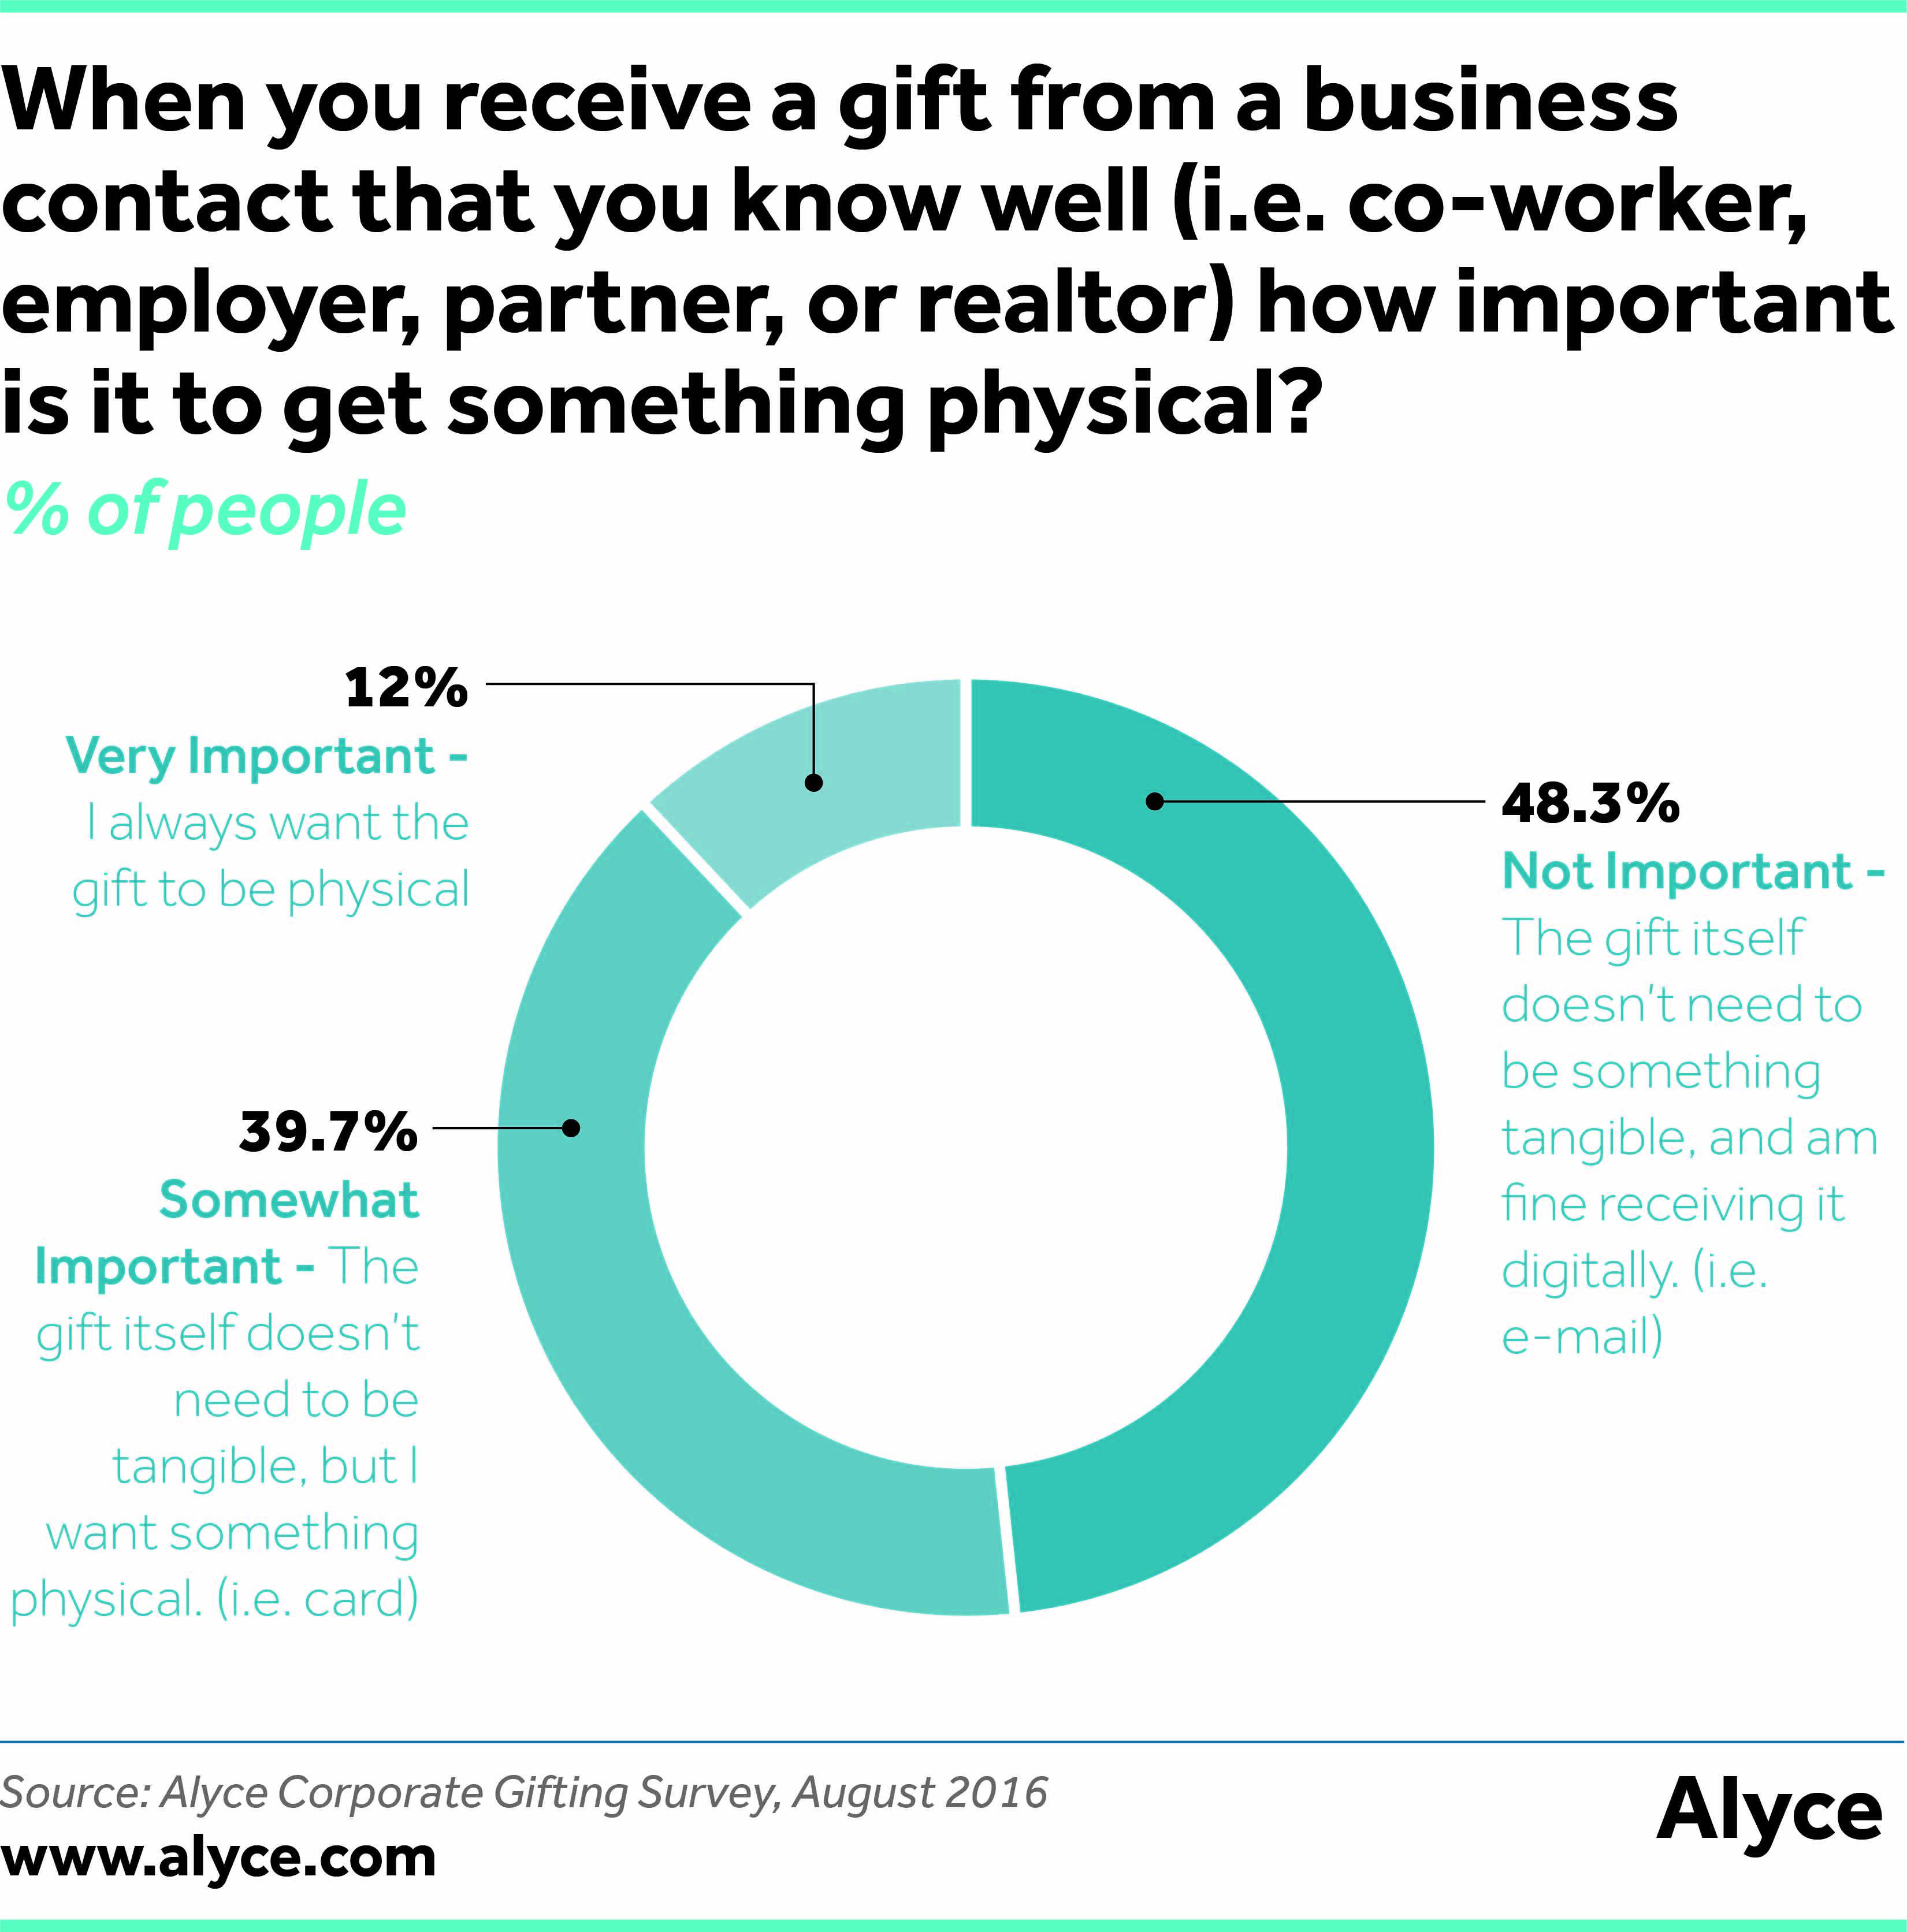 When you receive a gift from a business contact that you know well (i.e. co-worker, employer, partner, or realtor) how important is it to get something physical?